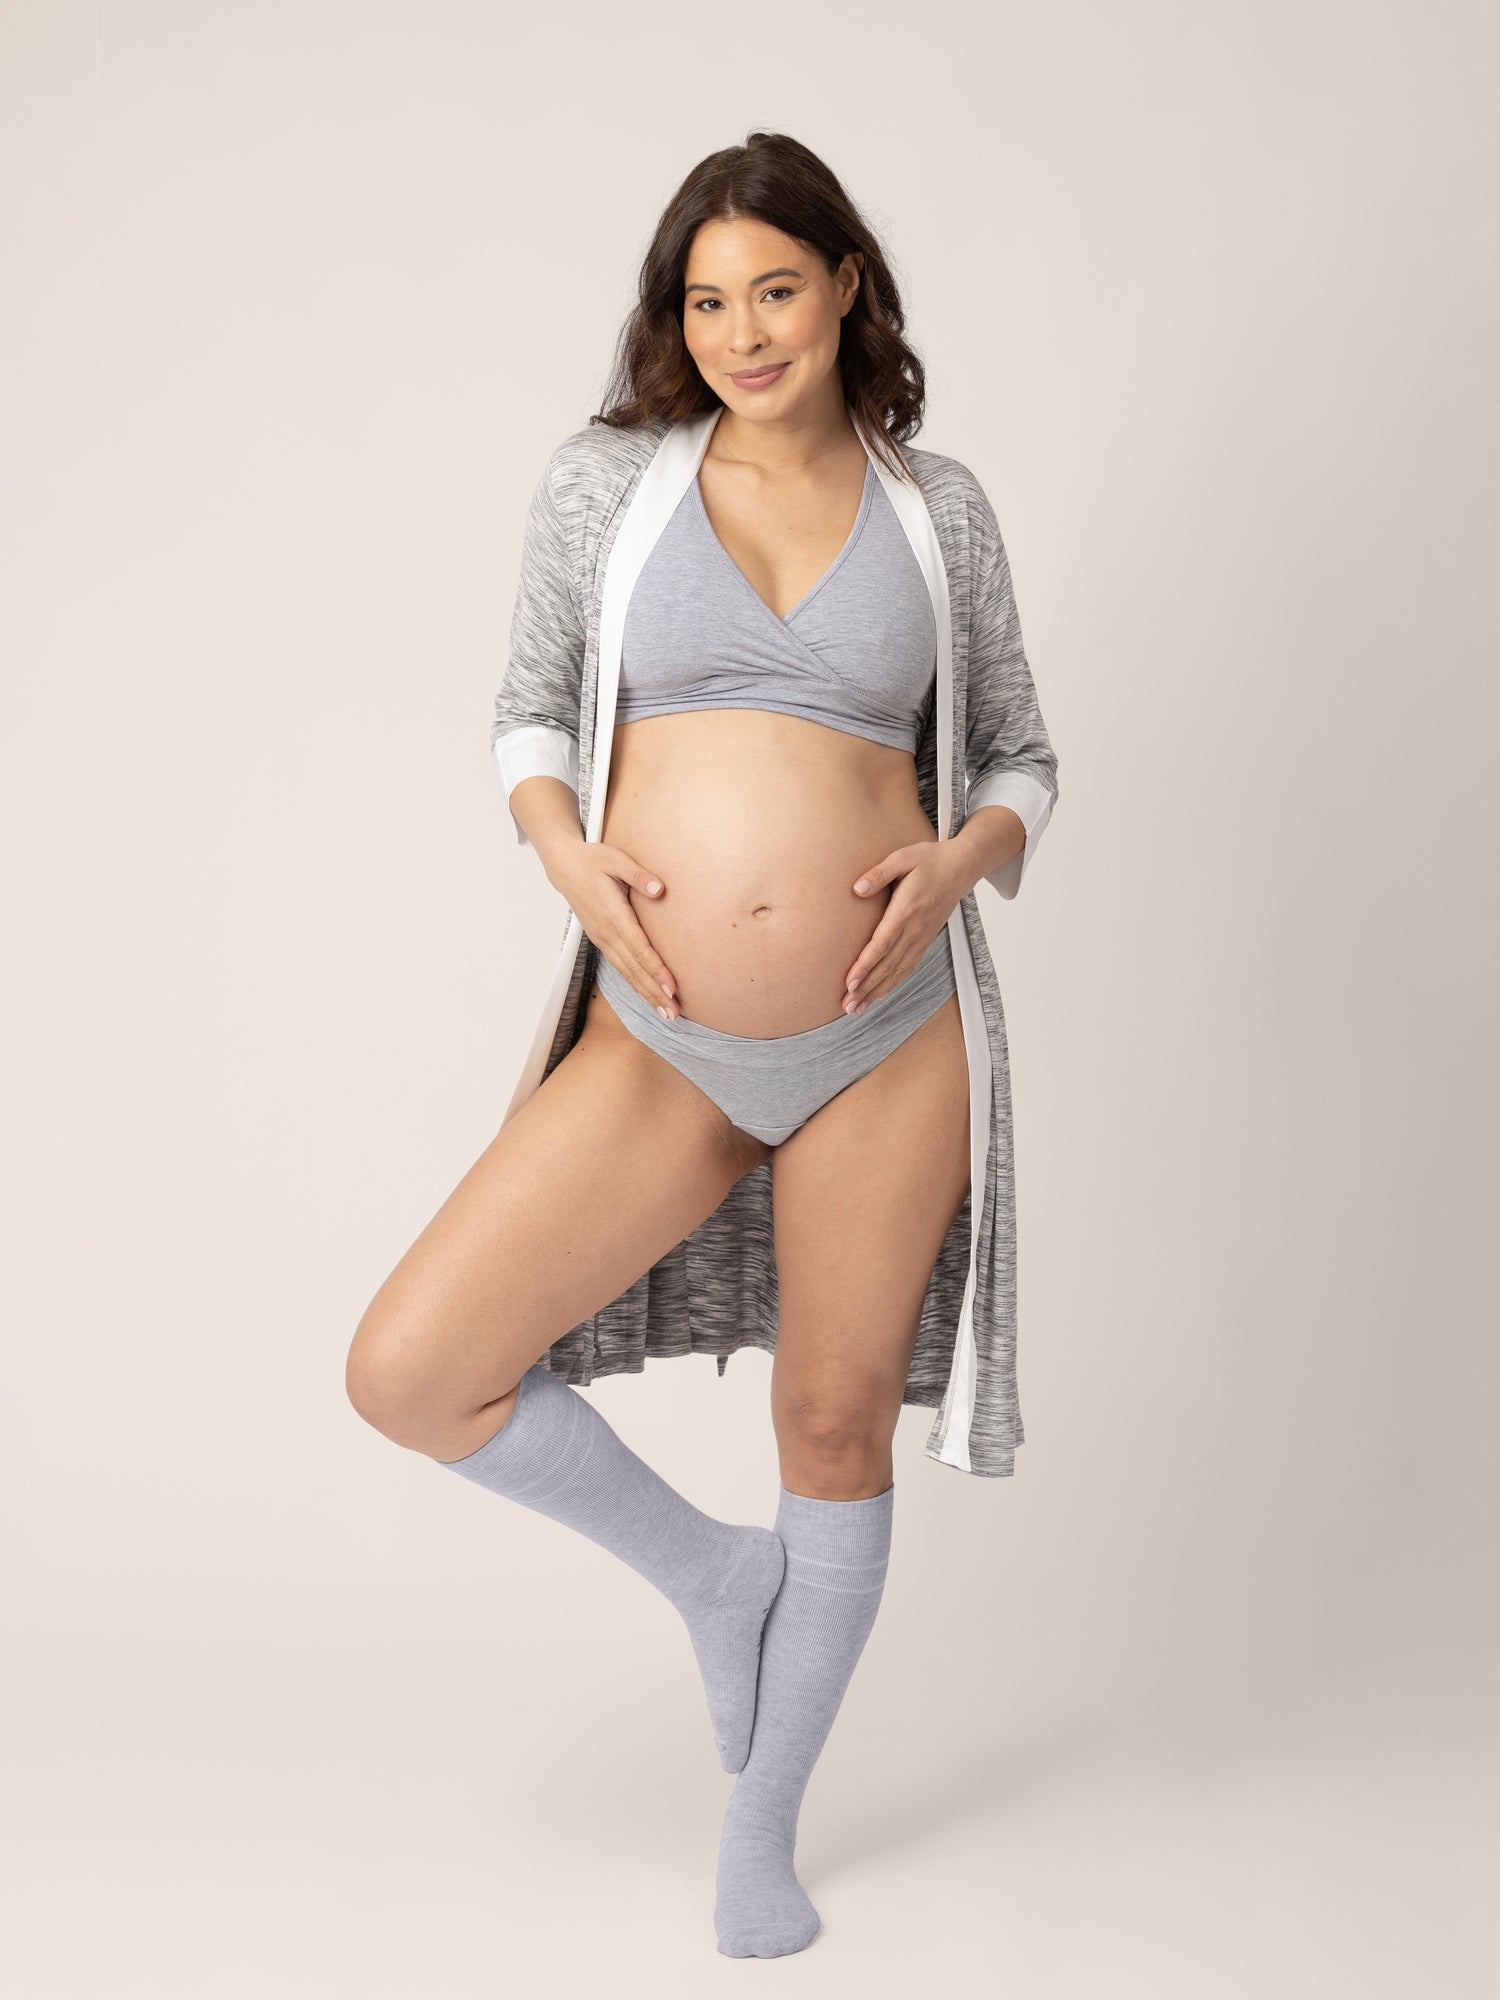 Pregnant model wearing the Premium Maternity Compression Socks in Grey Heather holding her belly.